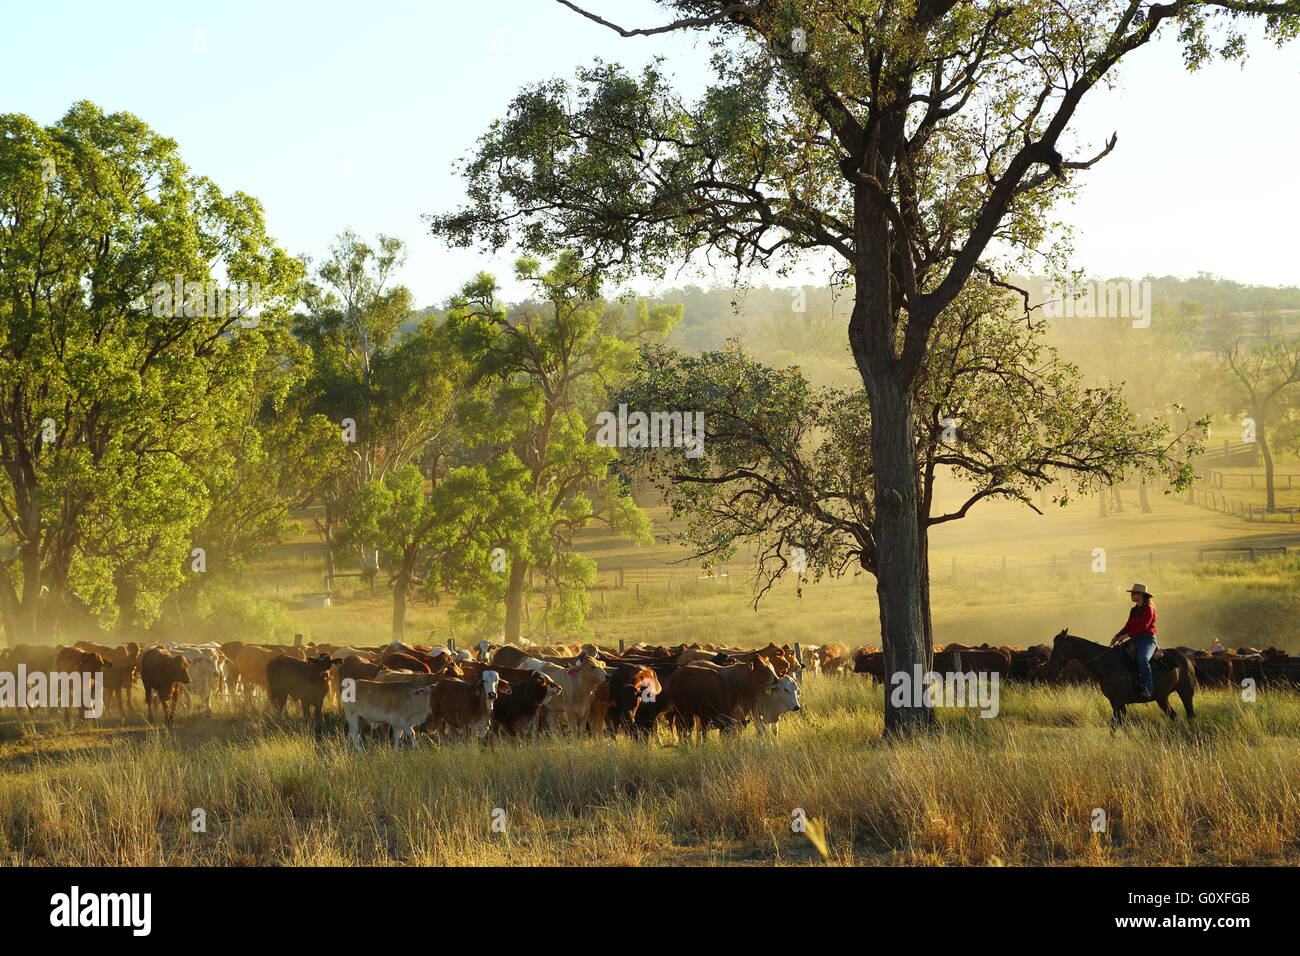 A large mob of cattle being mustered during the Eidsvold Charity Cattle Drive near Eidsvold in Queensland, Australia. Stock Photo